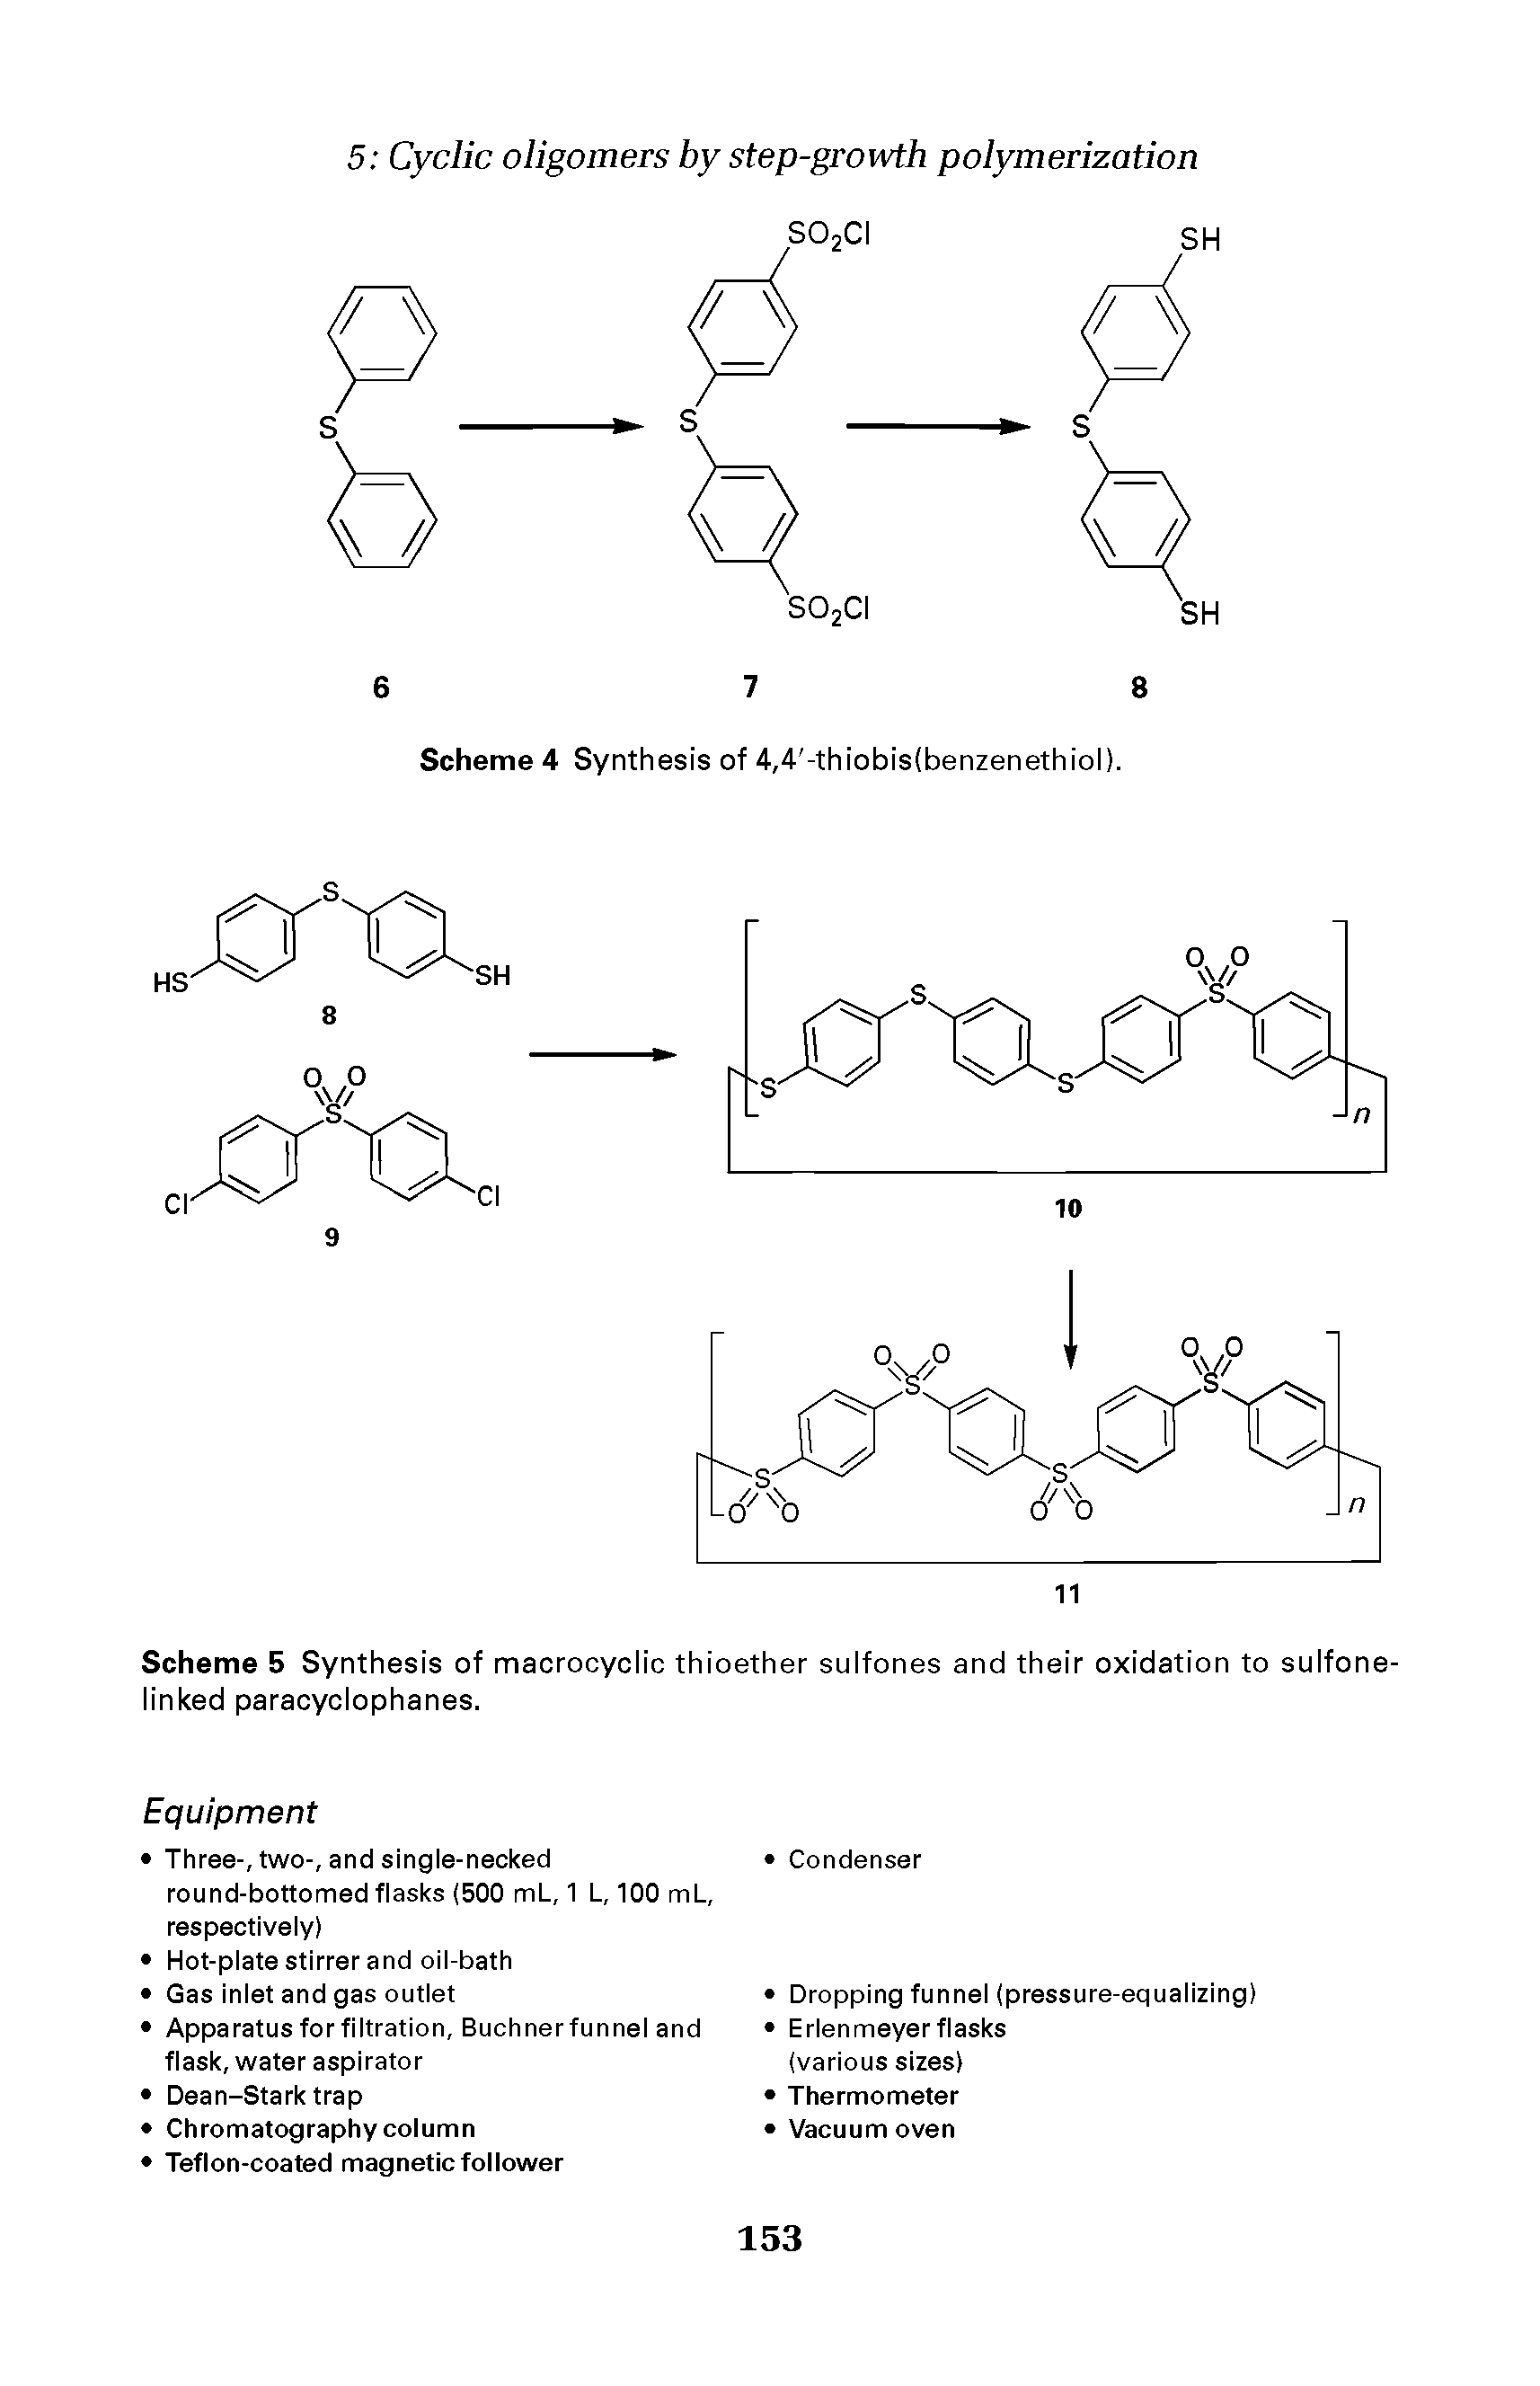 Scheme 5 Synthesis of macrocyclic thioether sulfones and their oxidation to sulfone-linked paracyclophanes.